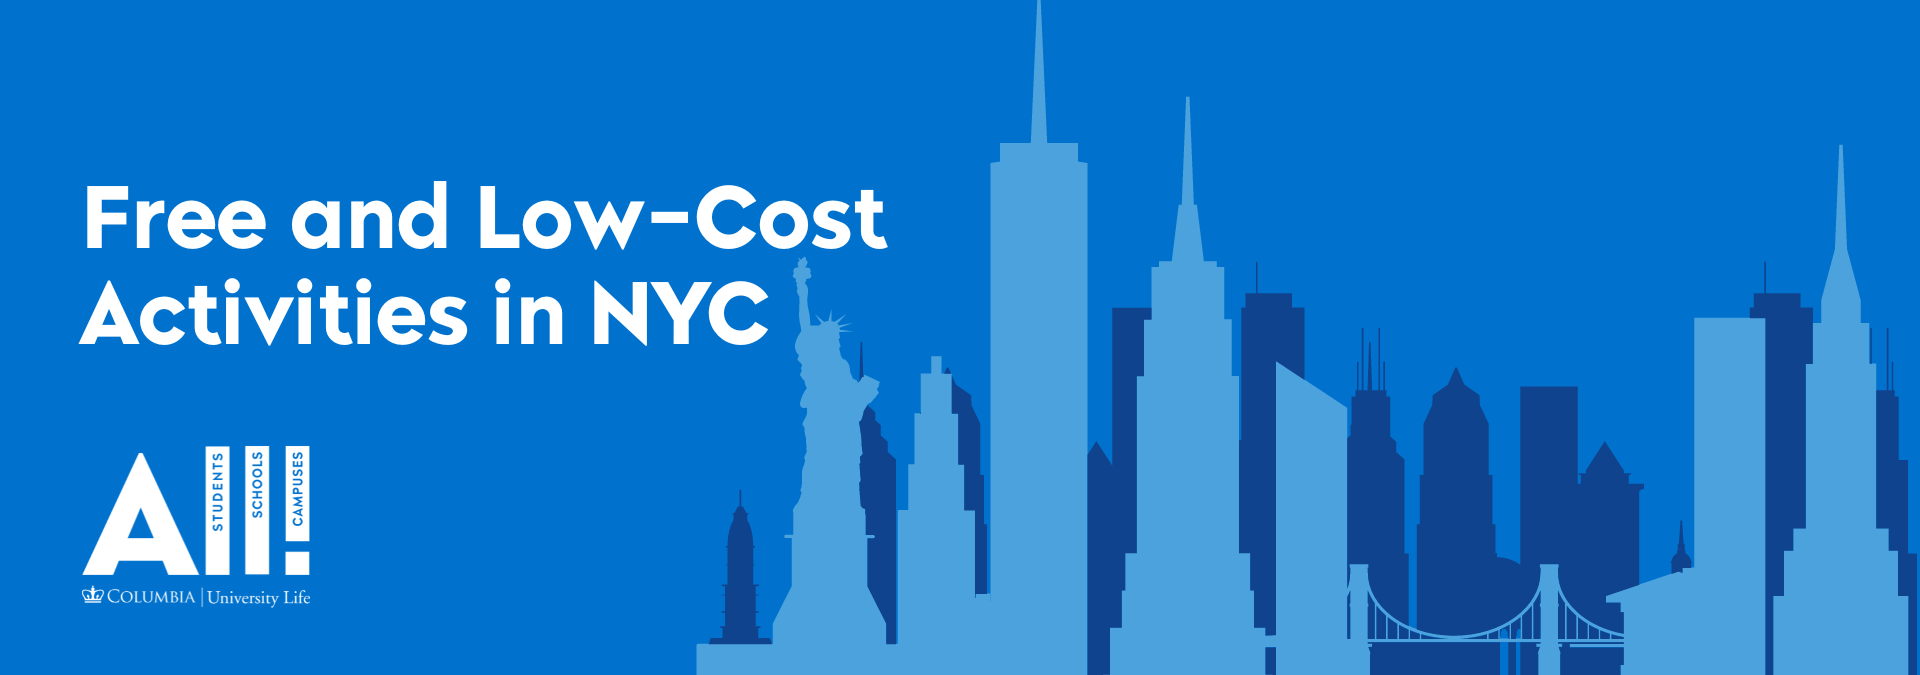 Text: Free and Low-Cost Activities in NYC on a blue background with a silhouette of the New York City skyline